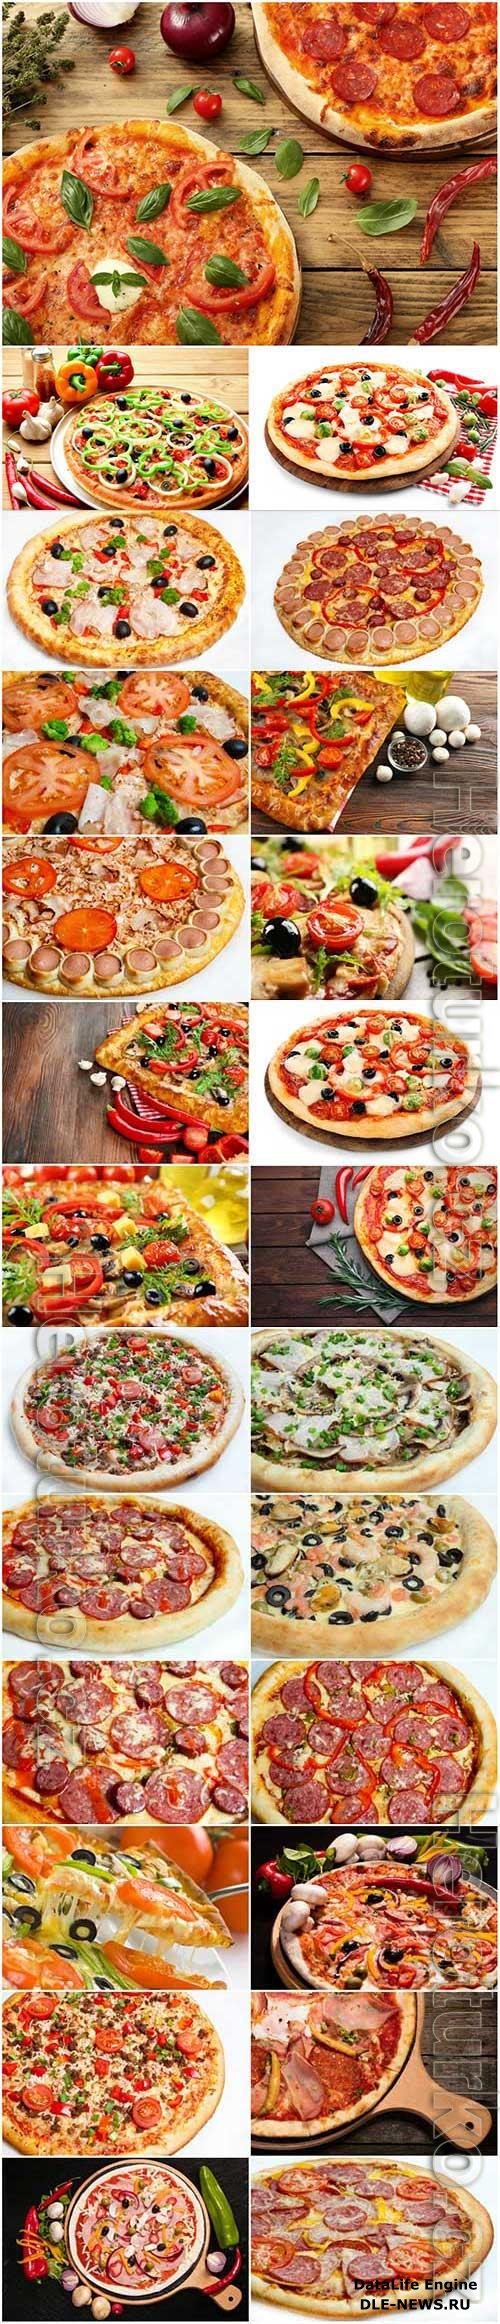 Pizza with different flavors stock photo